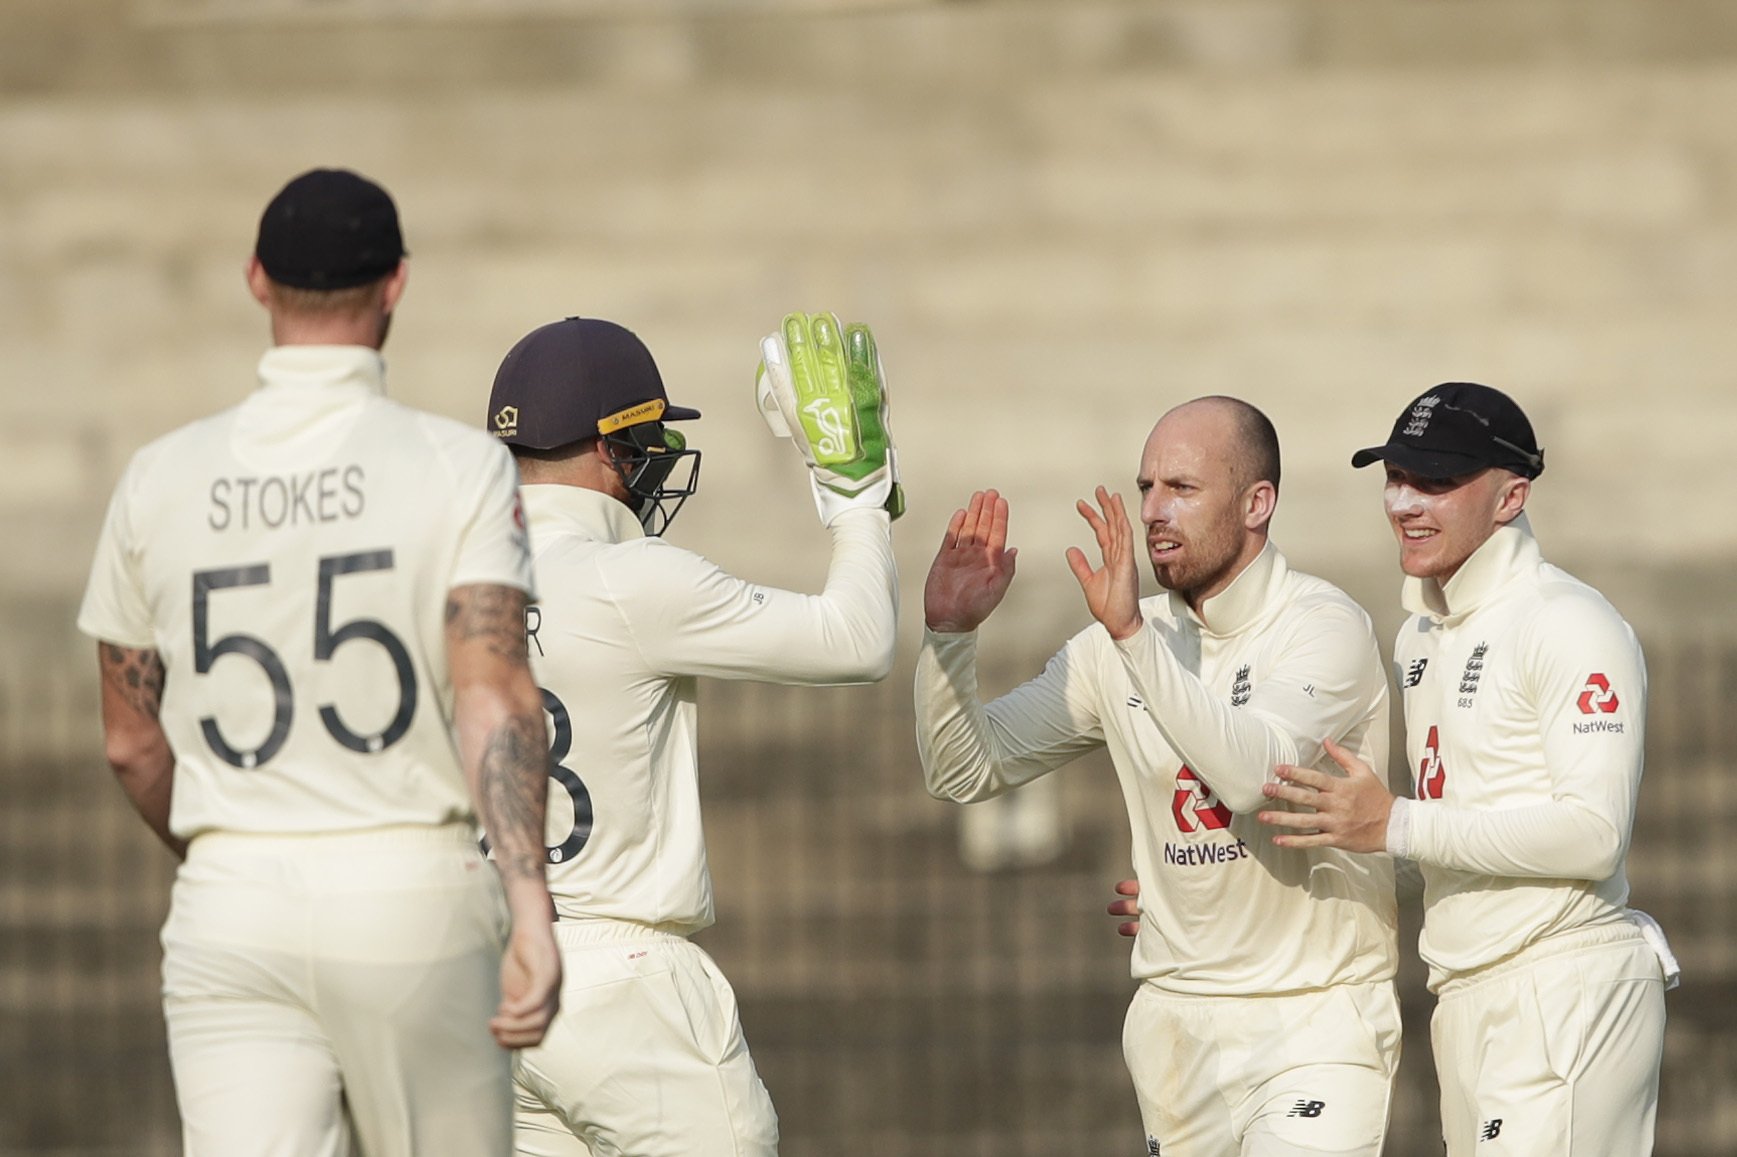 Twitter Erupts As England Hand India Their First Test Defeat On Home Soil Since 2017